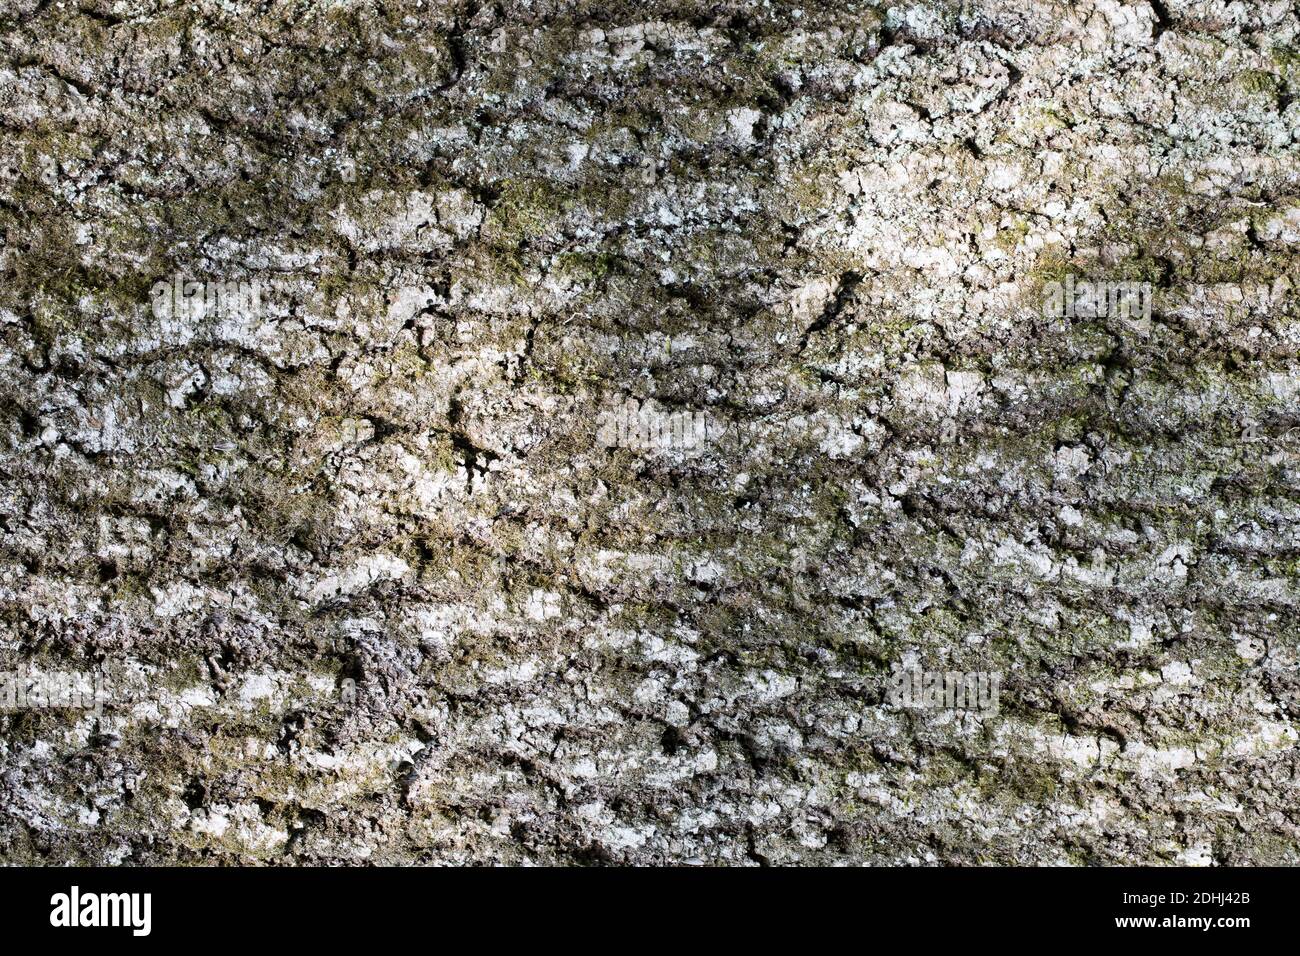 abstract backgrounds: bark of an old ash-tree with moss and lichen Stock Photo